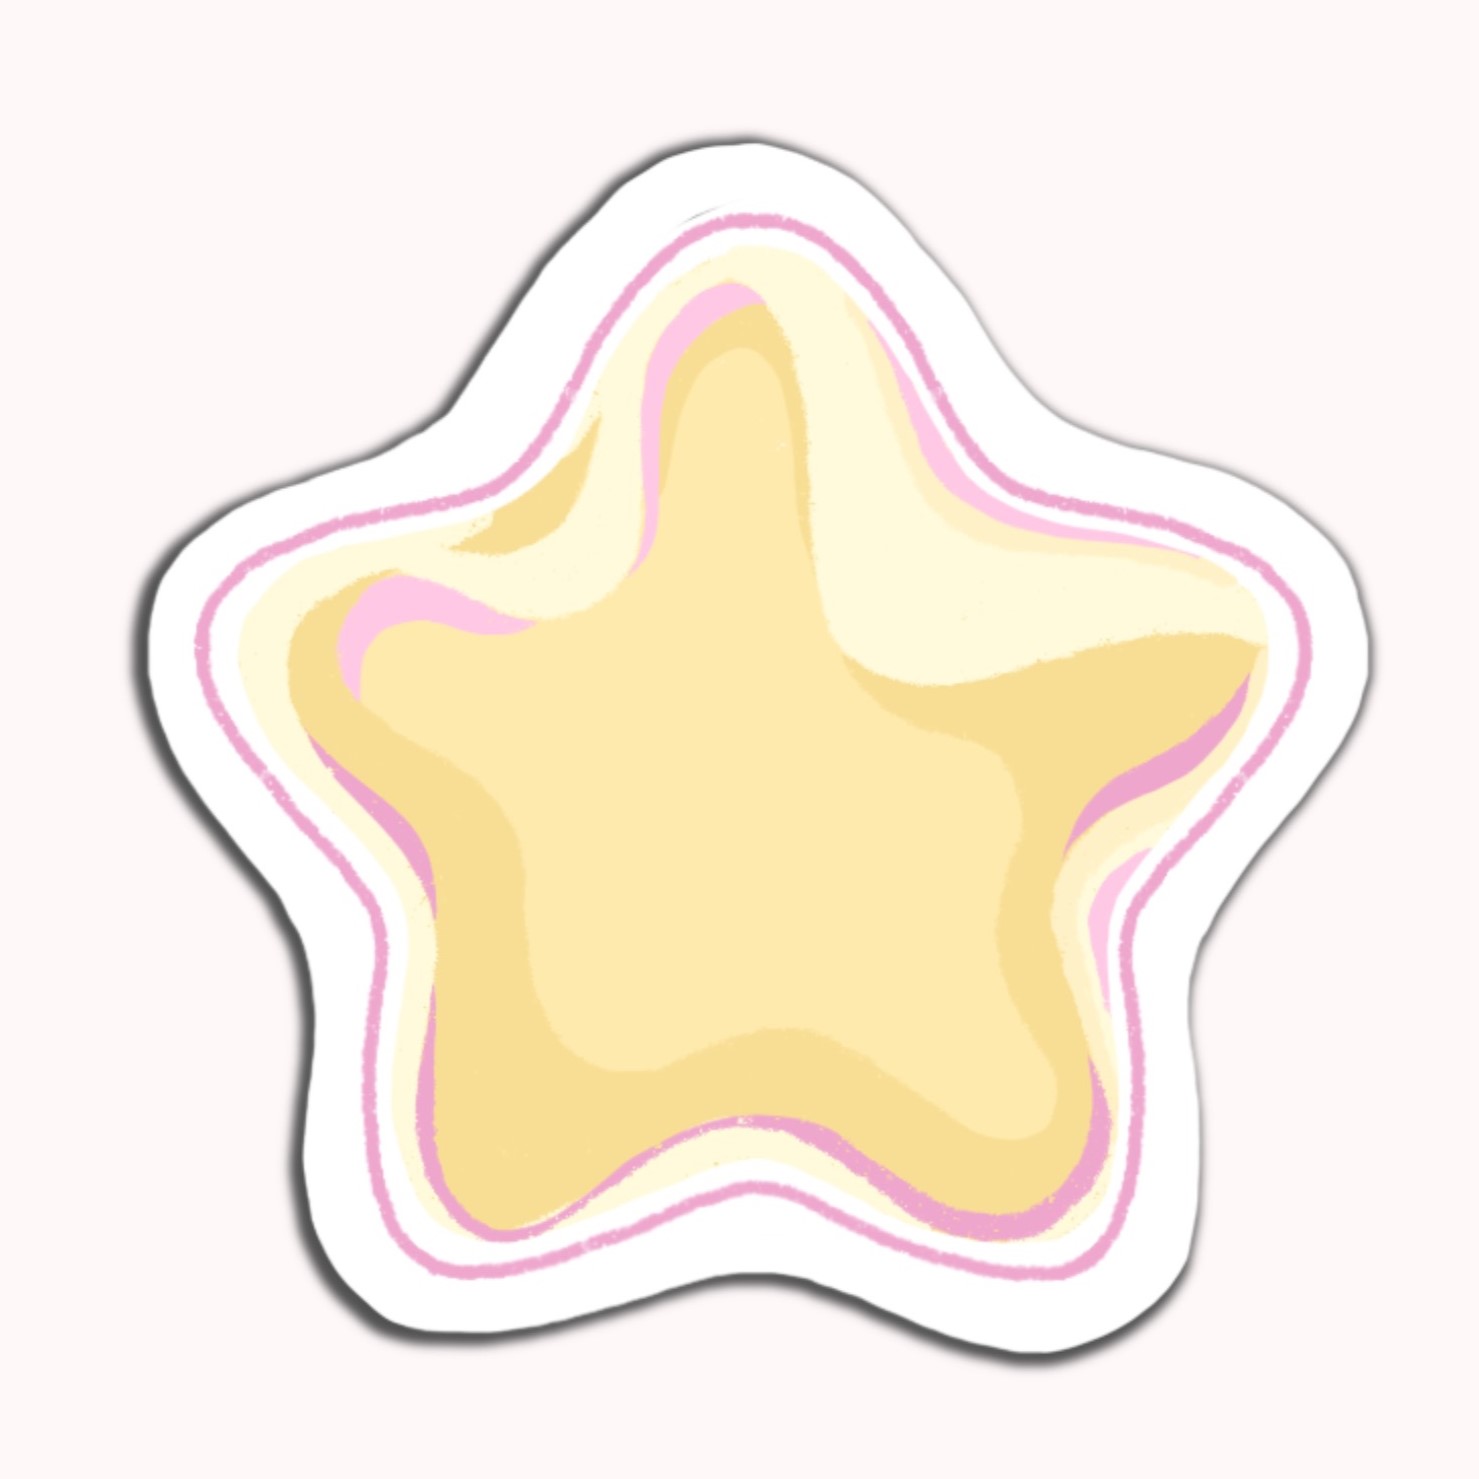 Kirby star sticker design in monochromatic yellow color scheme with a pink outline.